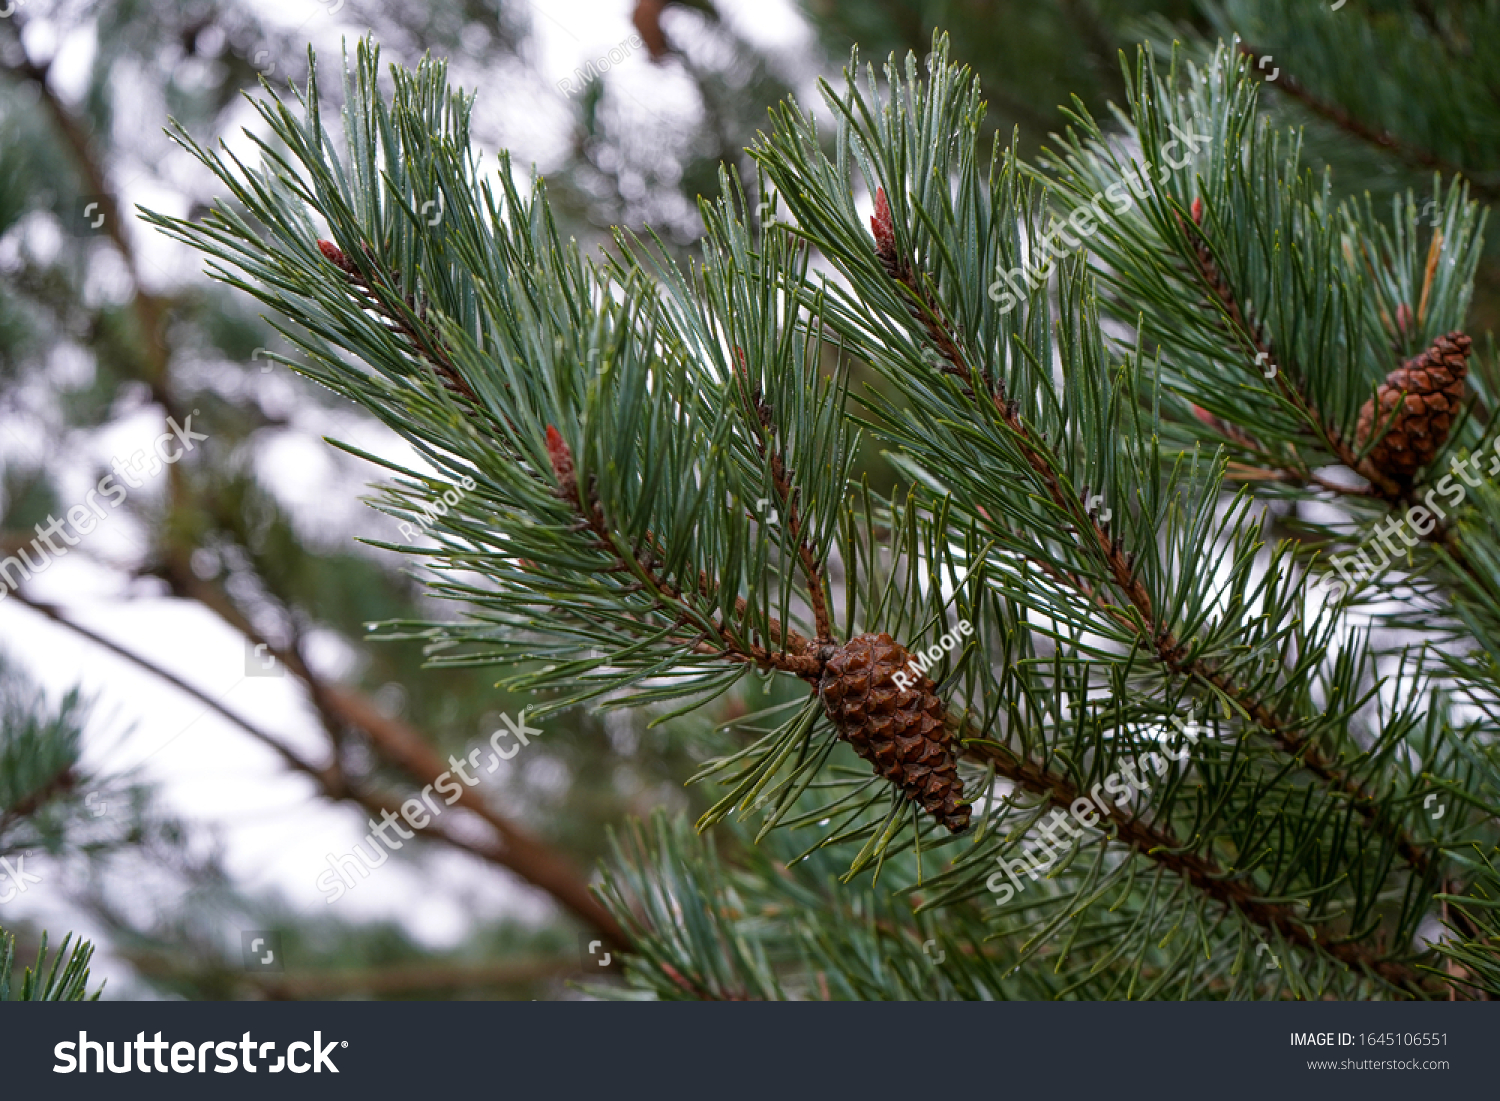 Pine cones in a pine tree #1645106551